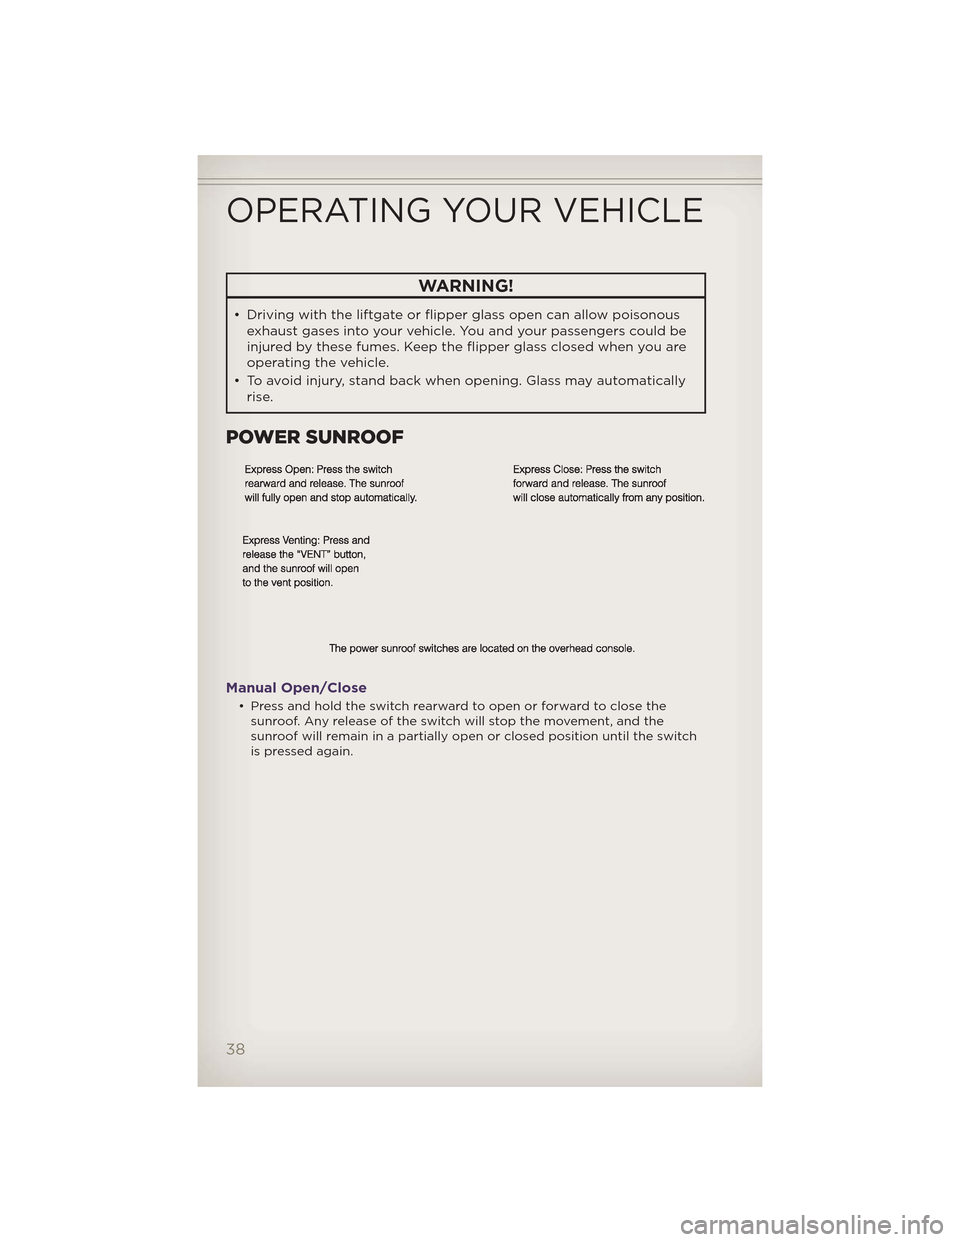 JEEP GRAND CHEROKEE 2012 WK2 / 4.G User Guide WARNING!
• Driving with the liftgate or flipper glass open can allow poisonousexhaust gases into your vehicle. You and your passengers could be
injured by these fumes. Keep the flipper glass closed 